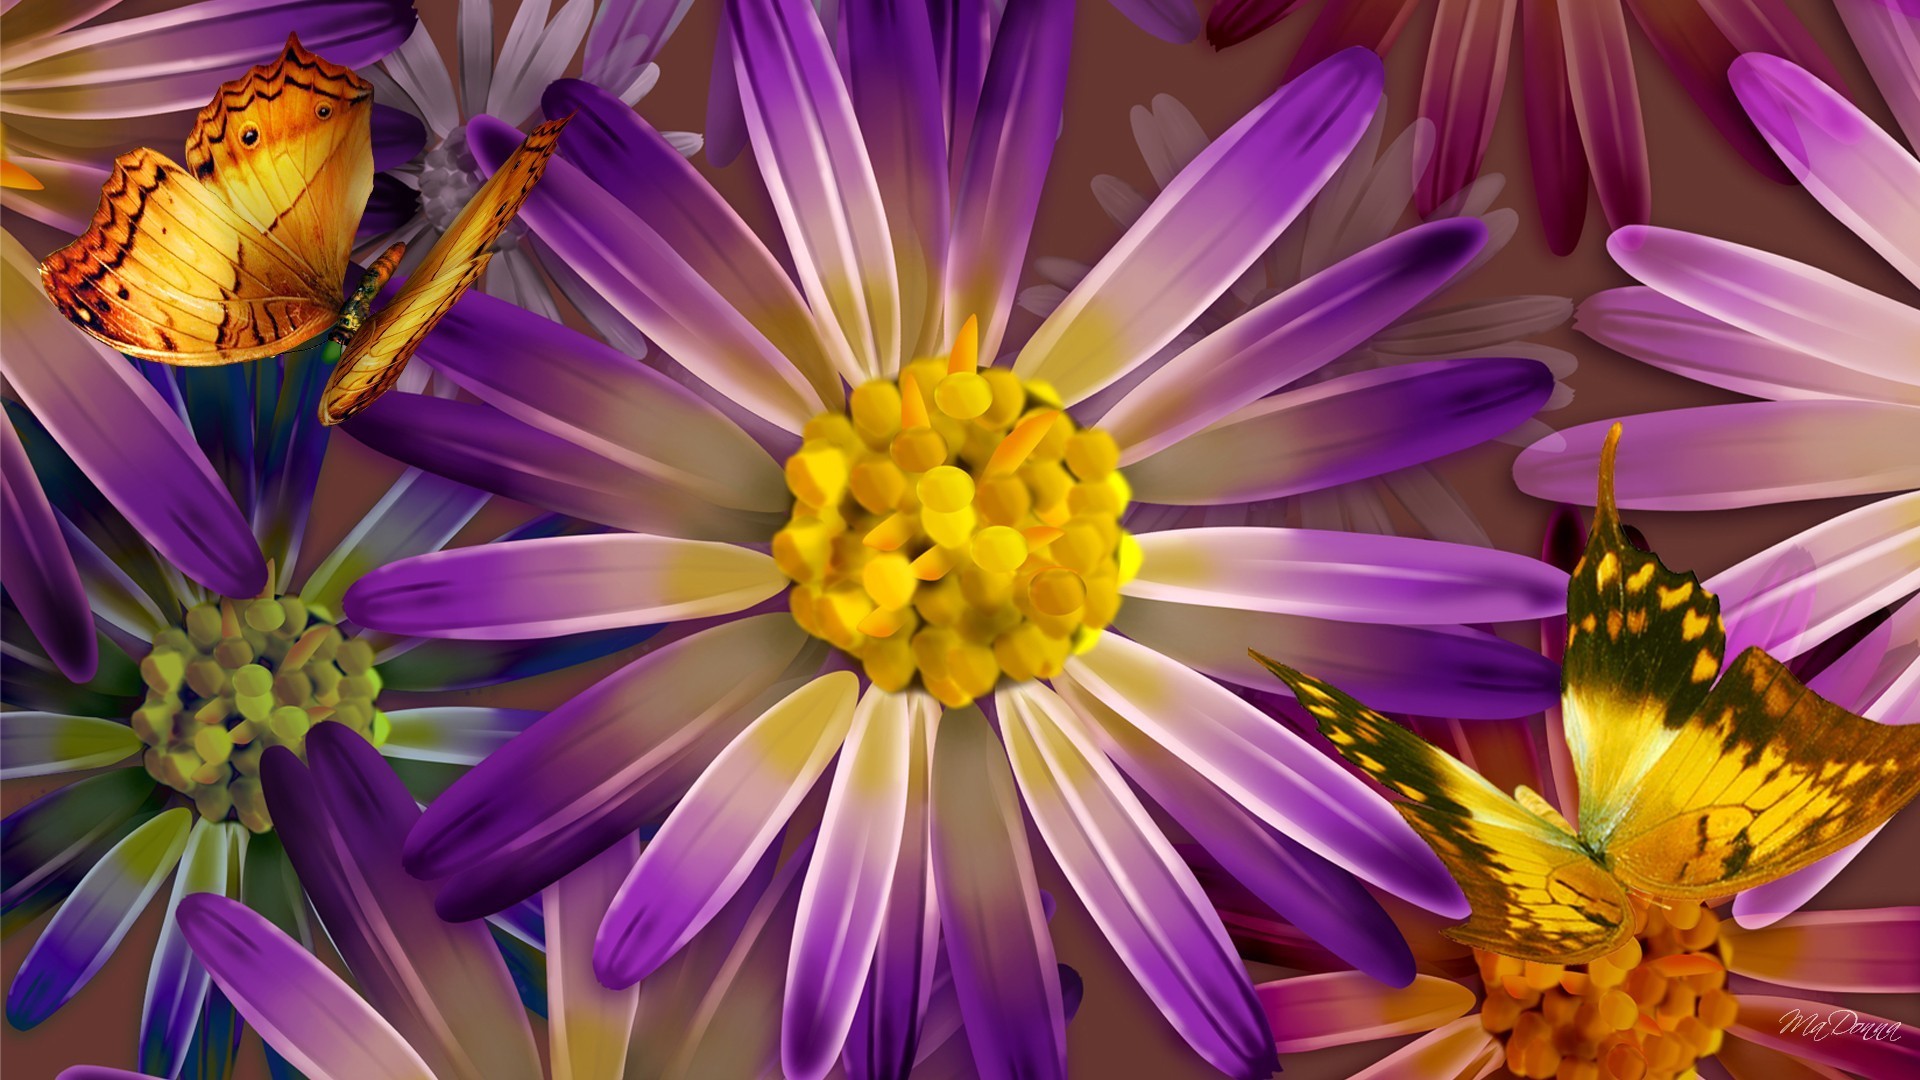 1920x1080 Flowers - Gold Delight Spring Daisy Floral Summer Purple Butterfly Flowers  Wallpapers Download Hd for HD